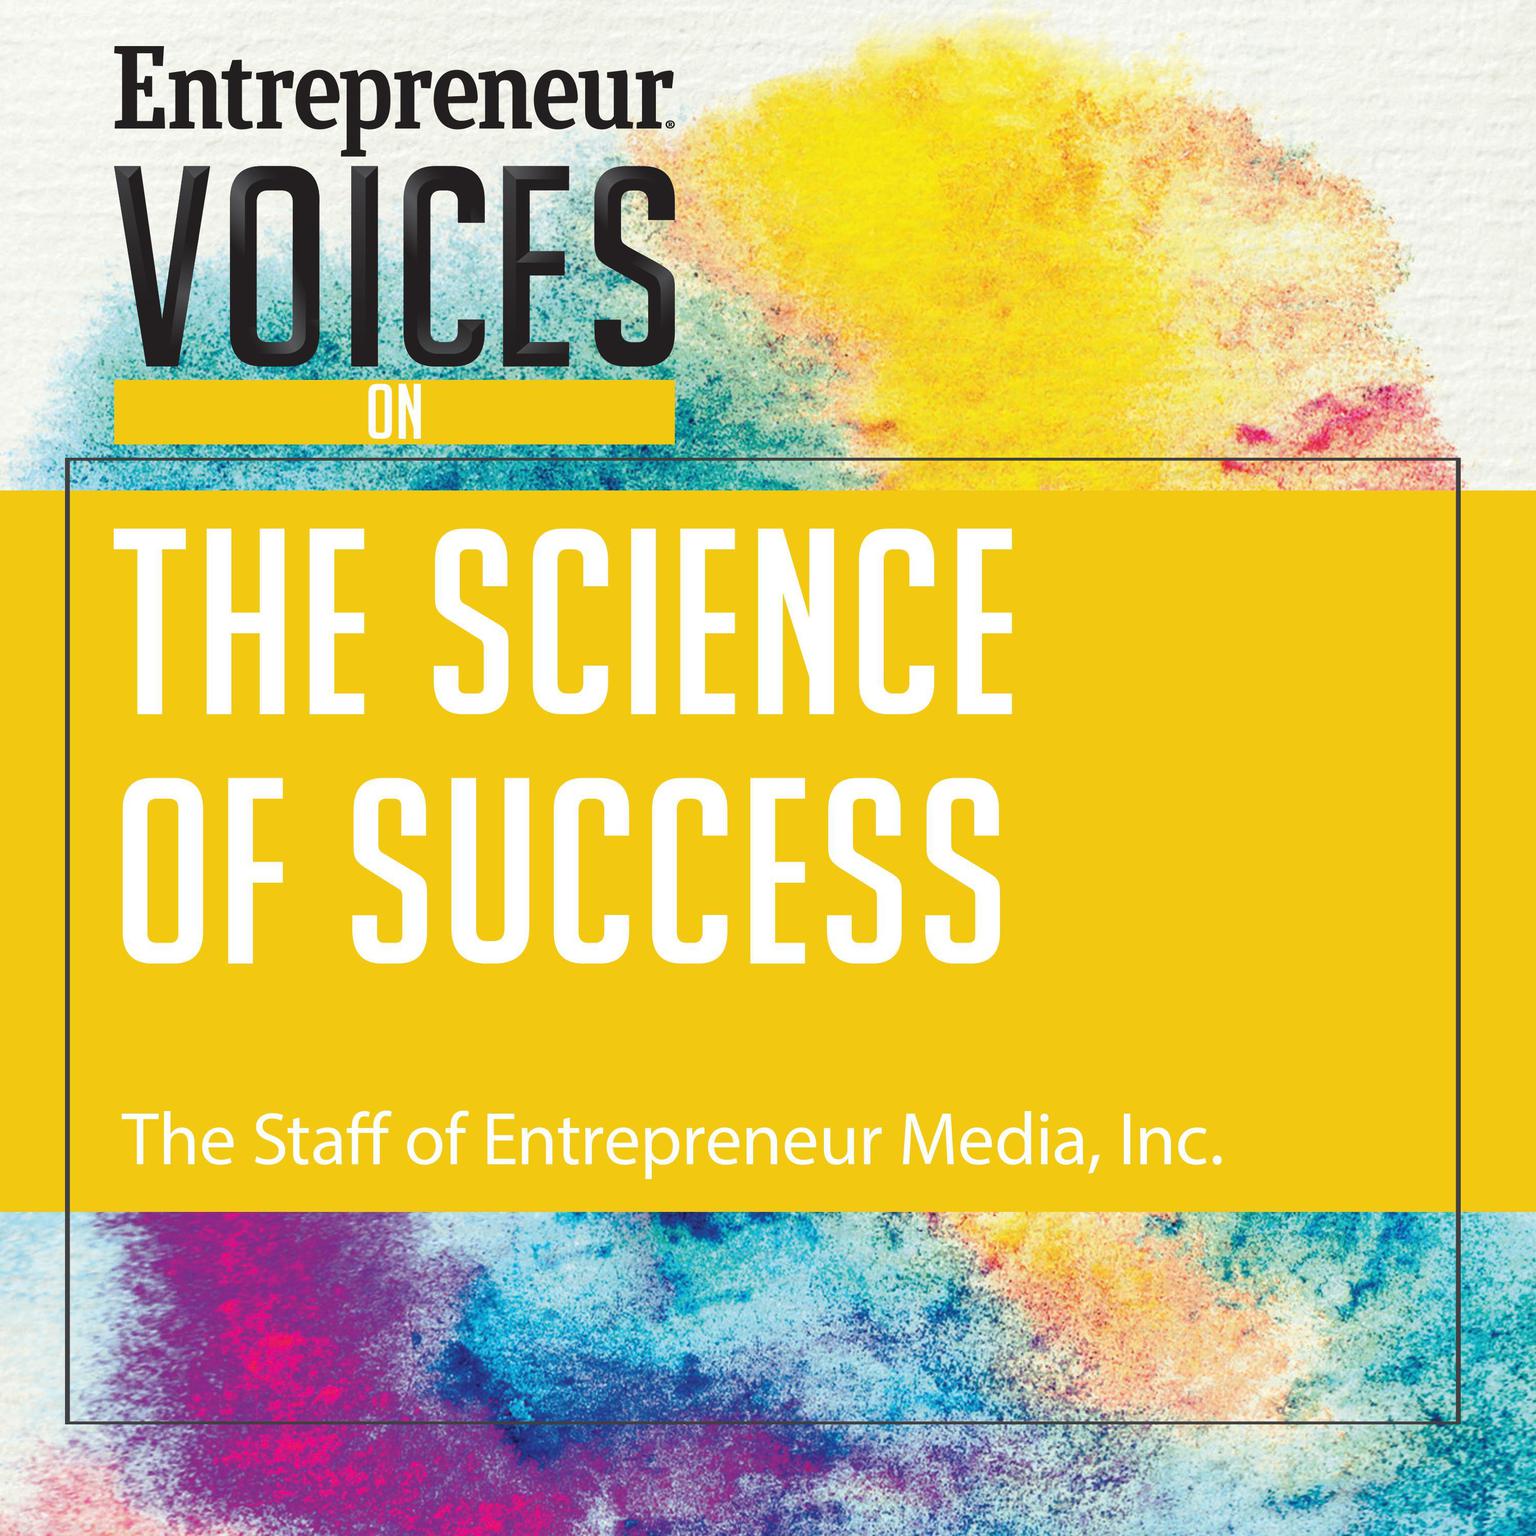 Entrepreneur Voices on the Science of Success Audiobook, by The Staff of Entrepreneur Media, Inc.